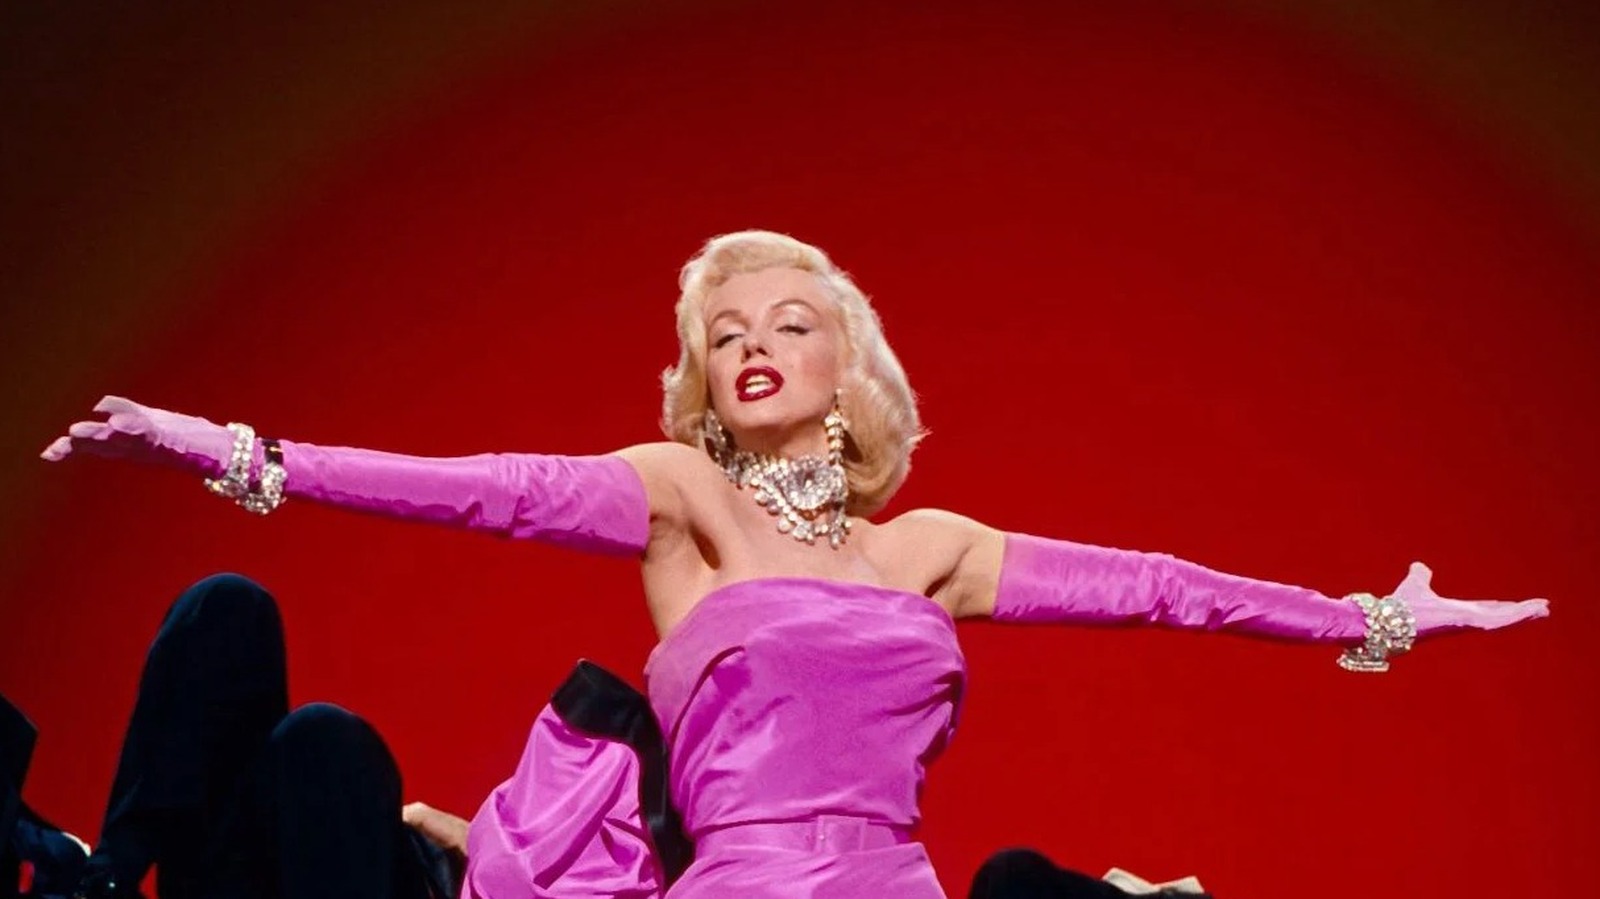 A blonde woman in a bright pink dress and bright pink gloves, with thick diamond jewelry along her neck and wrists, sings with arms outstretched in front of a red background.